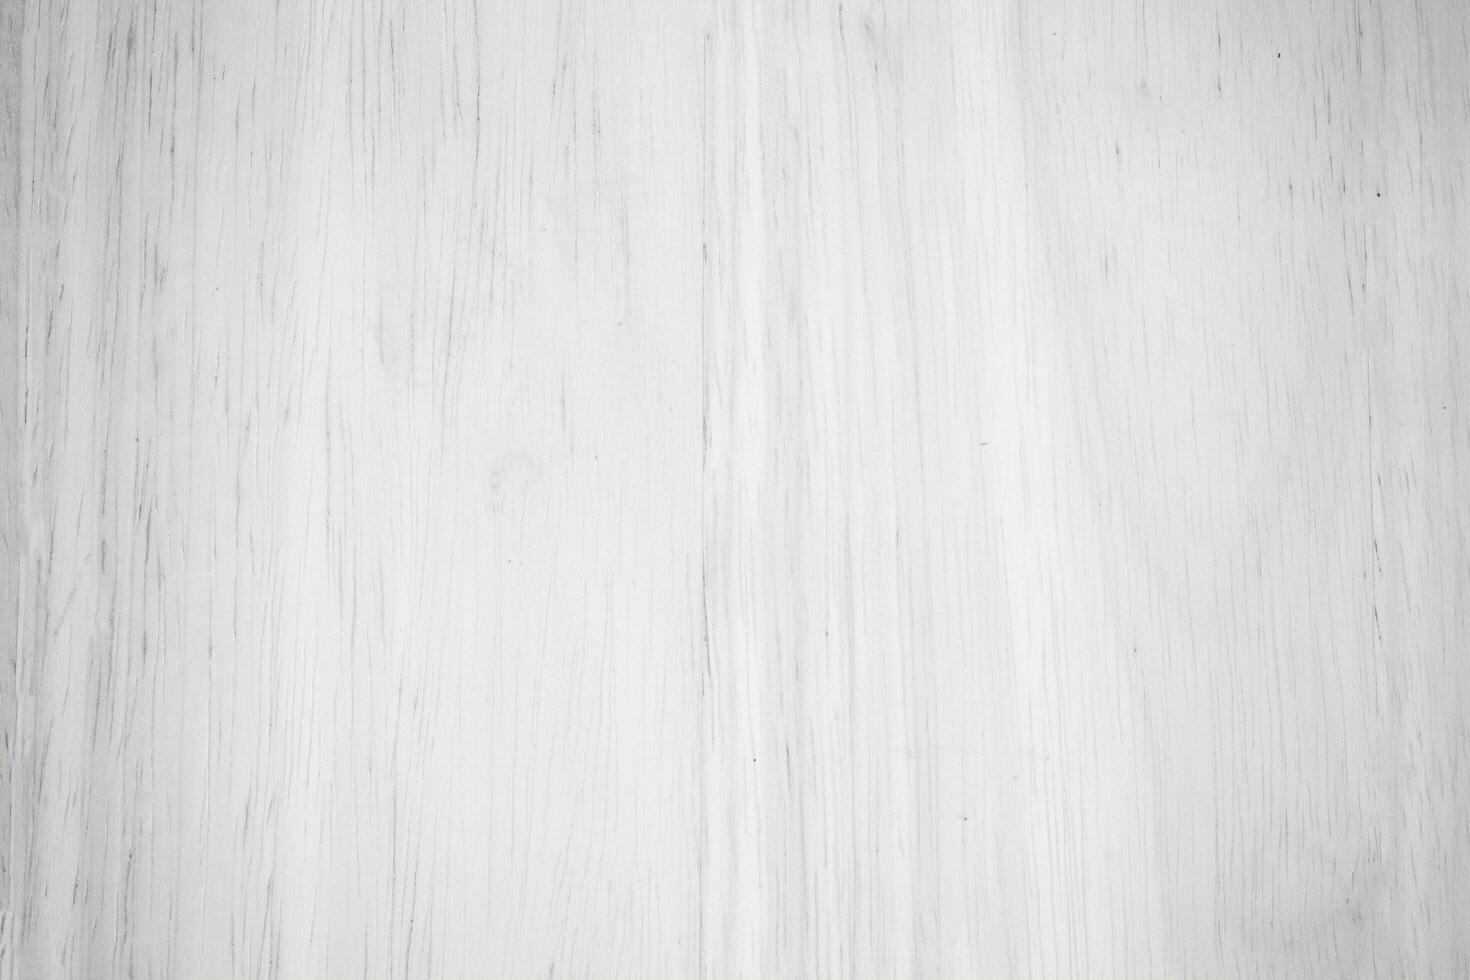 White wood Of Wooden Table close-up in full frame shot. photo